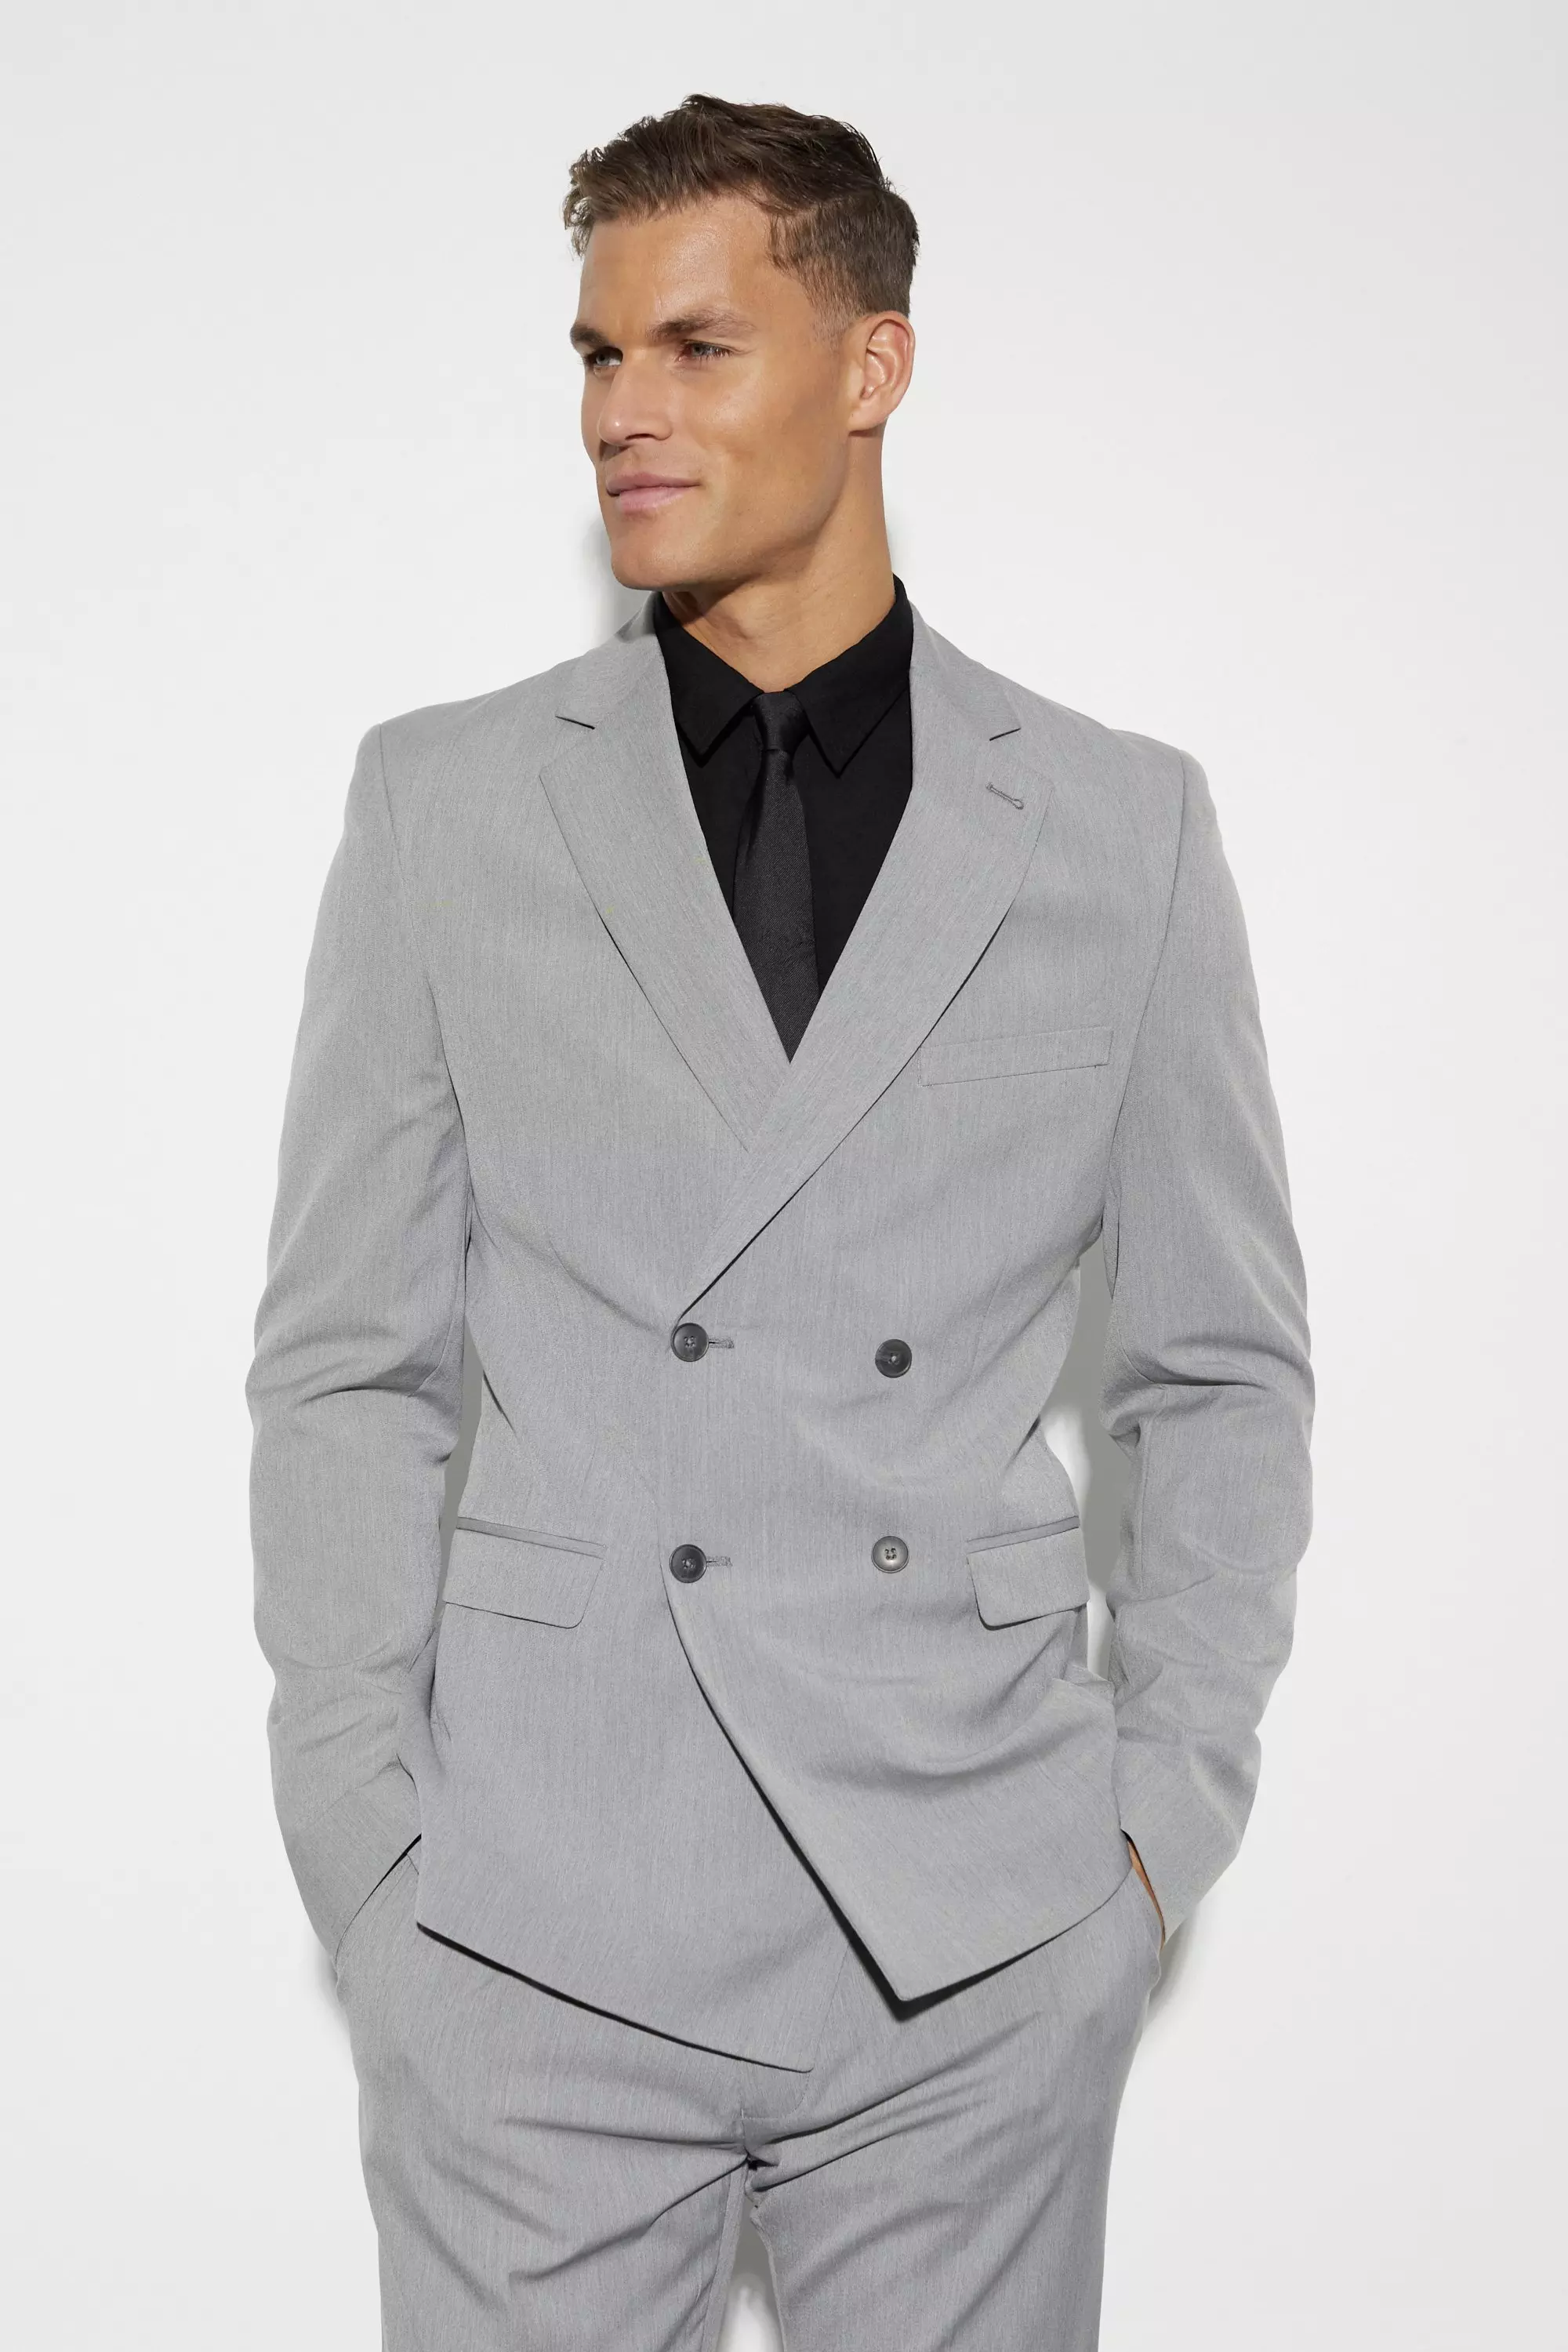 Tall Skinny Double Breasted Suit Jacket Grey